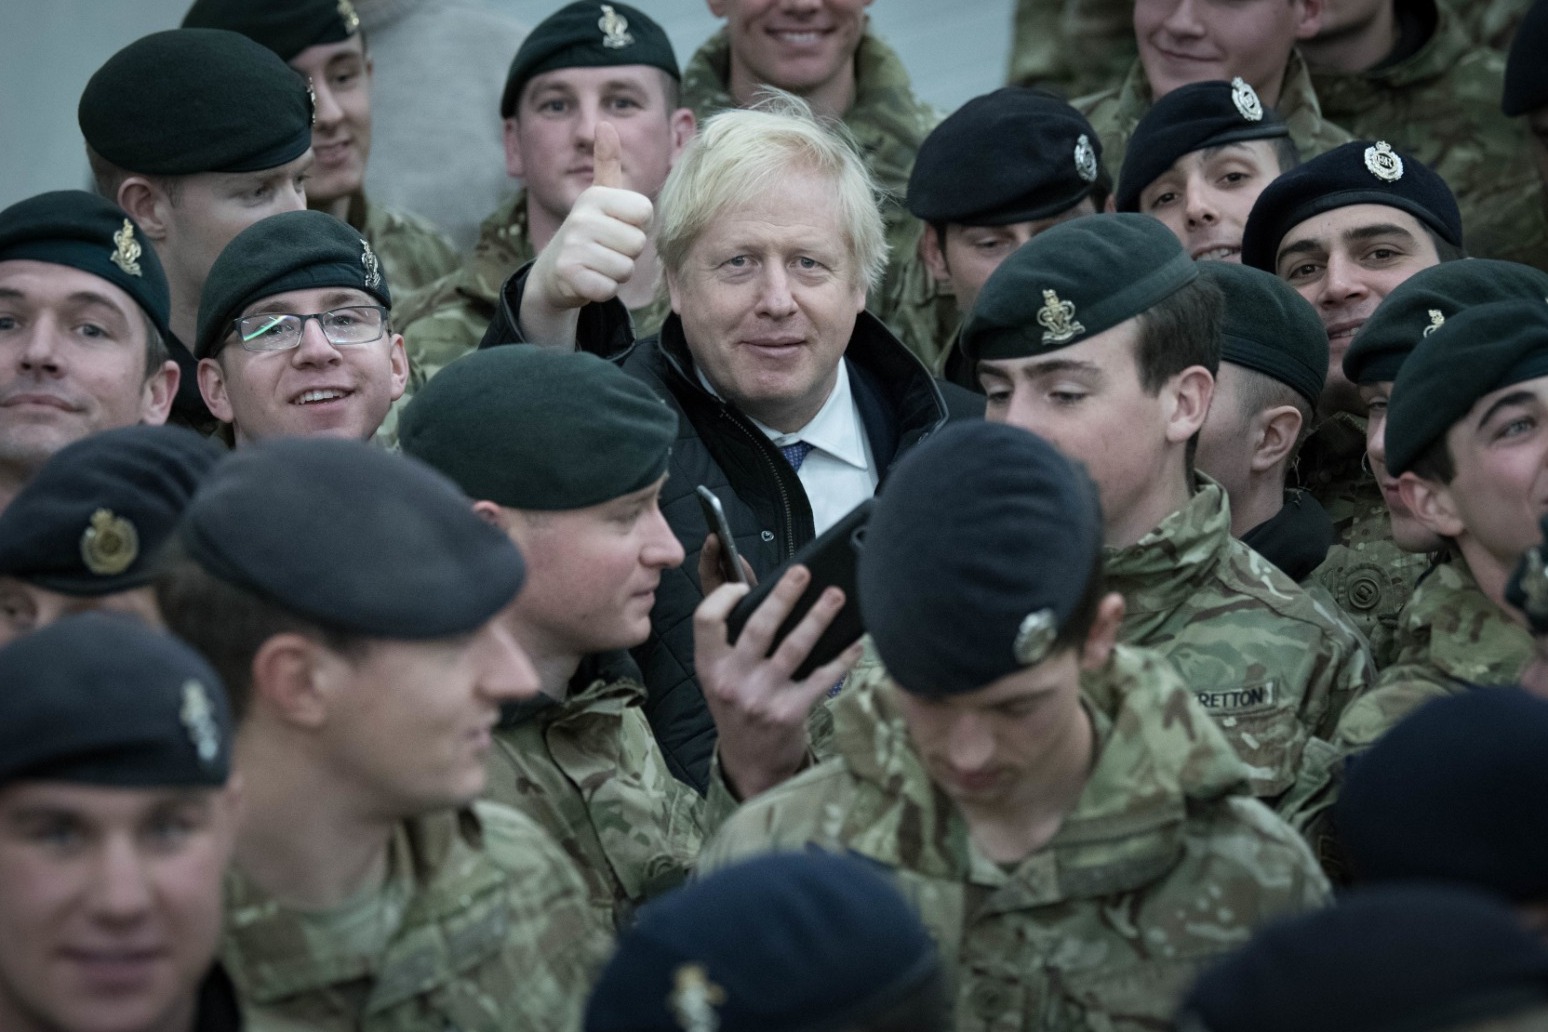 BORIS JOHNSON SERVES CHRISTMAS LUNCH TO BRITISH TROOPS STATIONED IN ESTONIA 